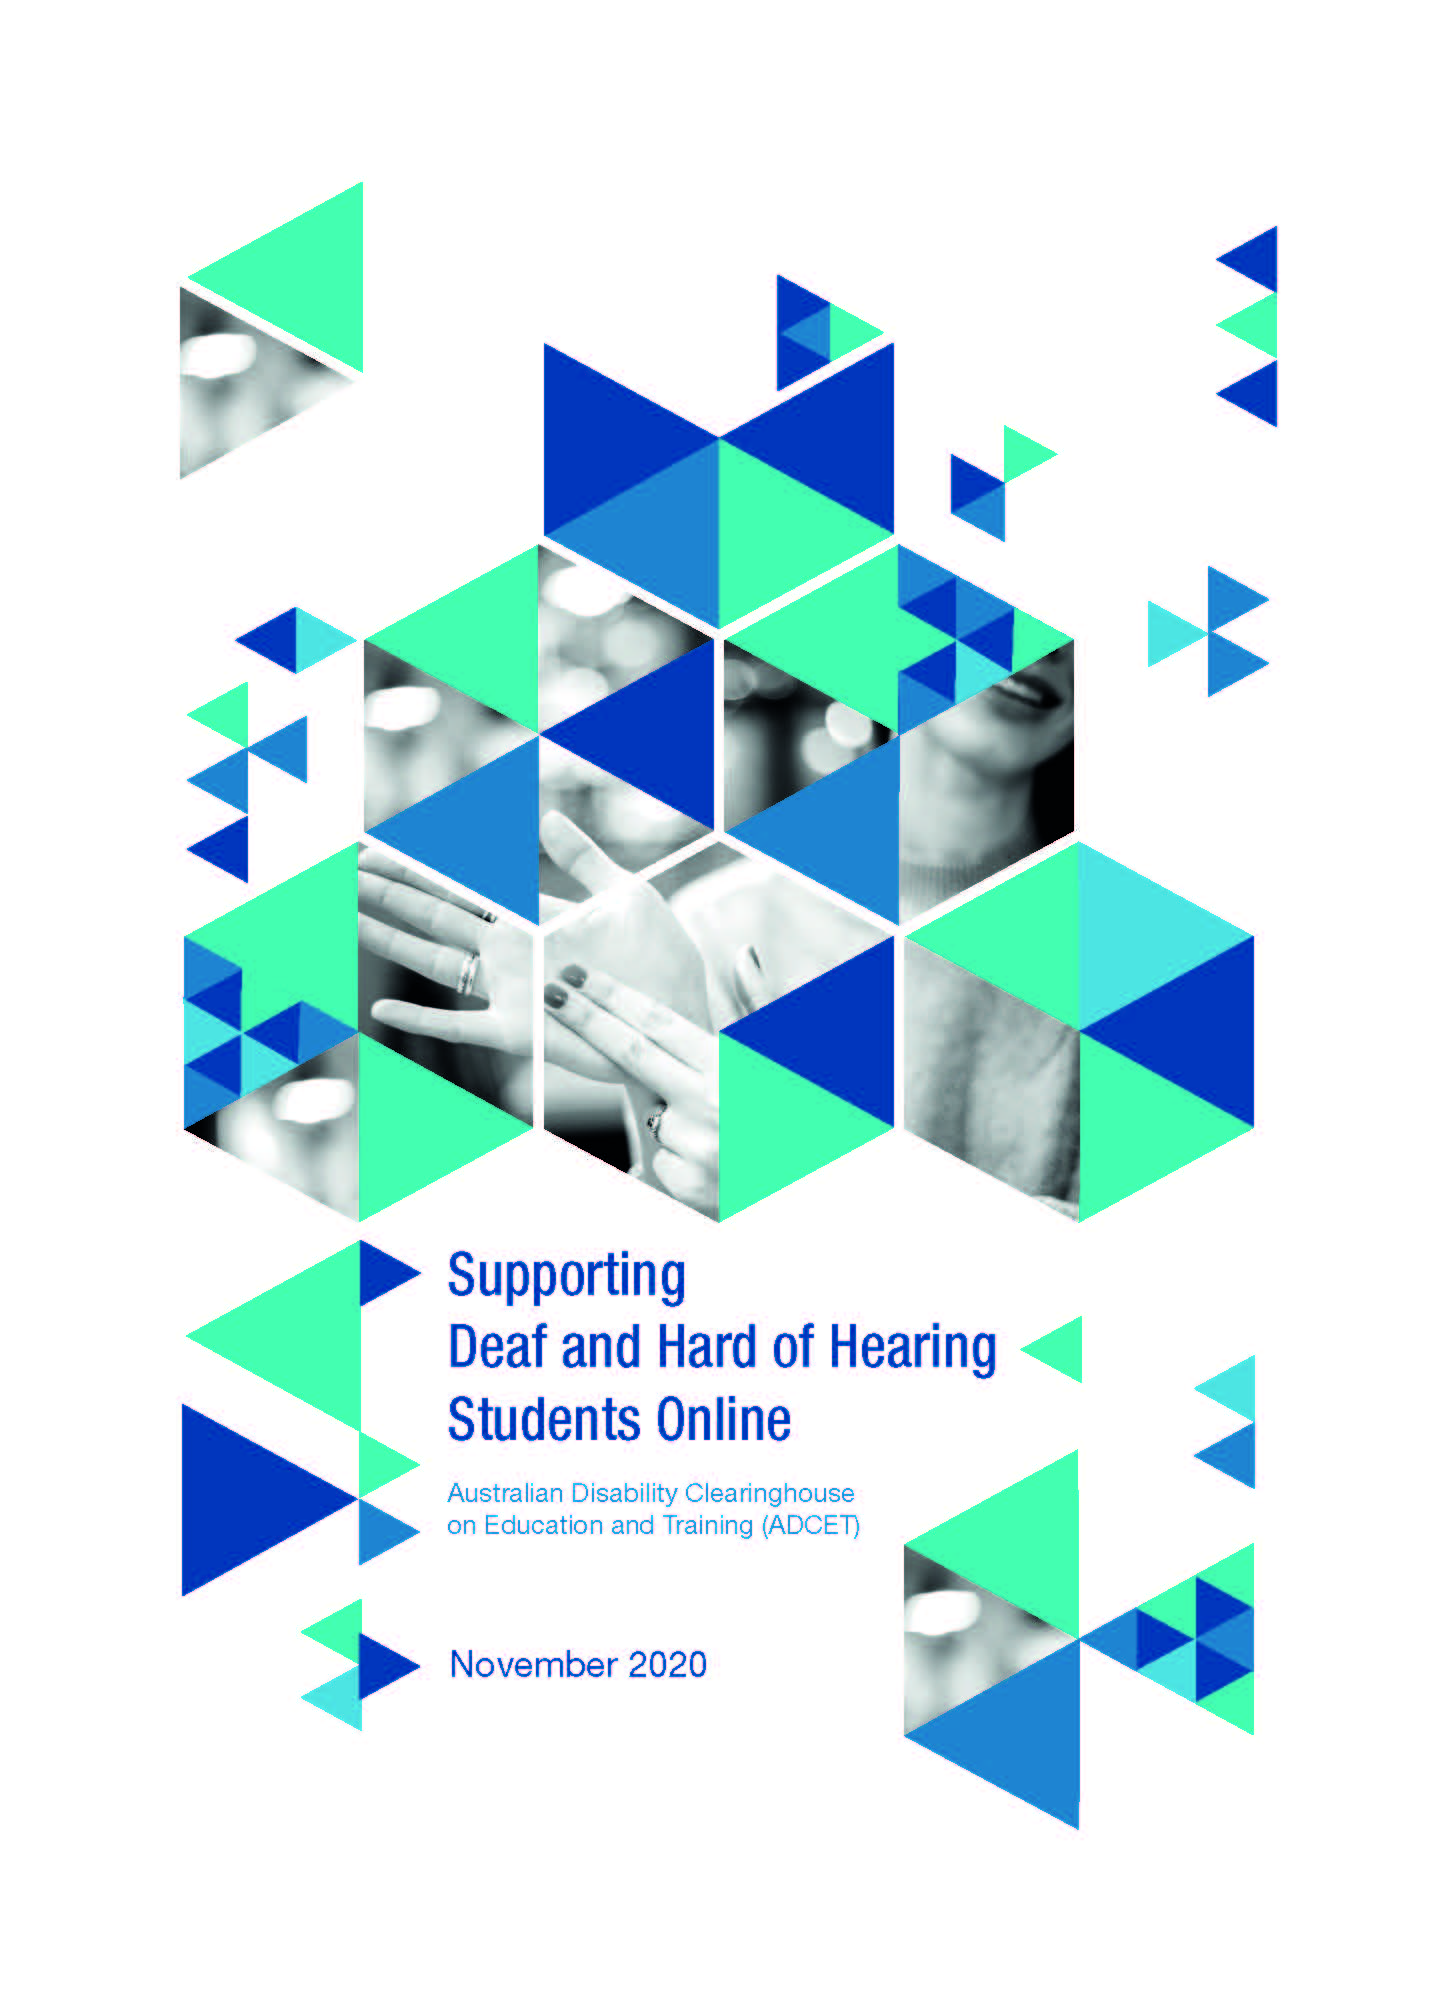 Supporting
Deaf and Hard of Hearing Students Online